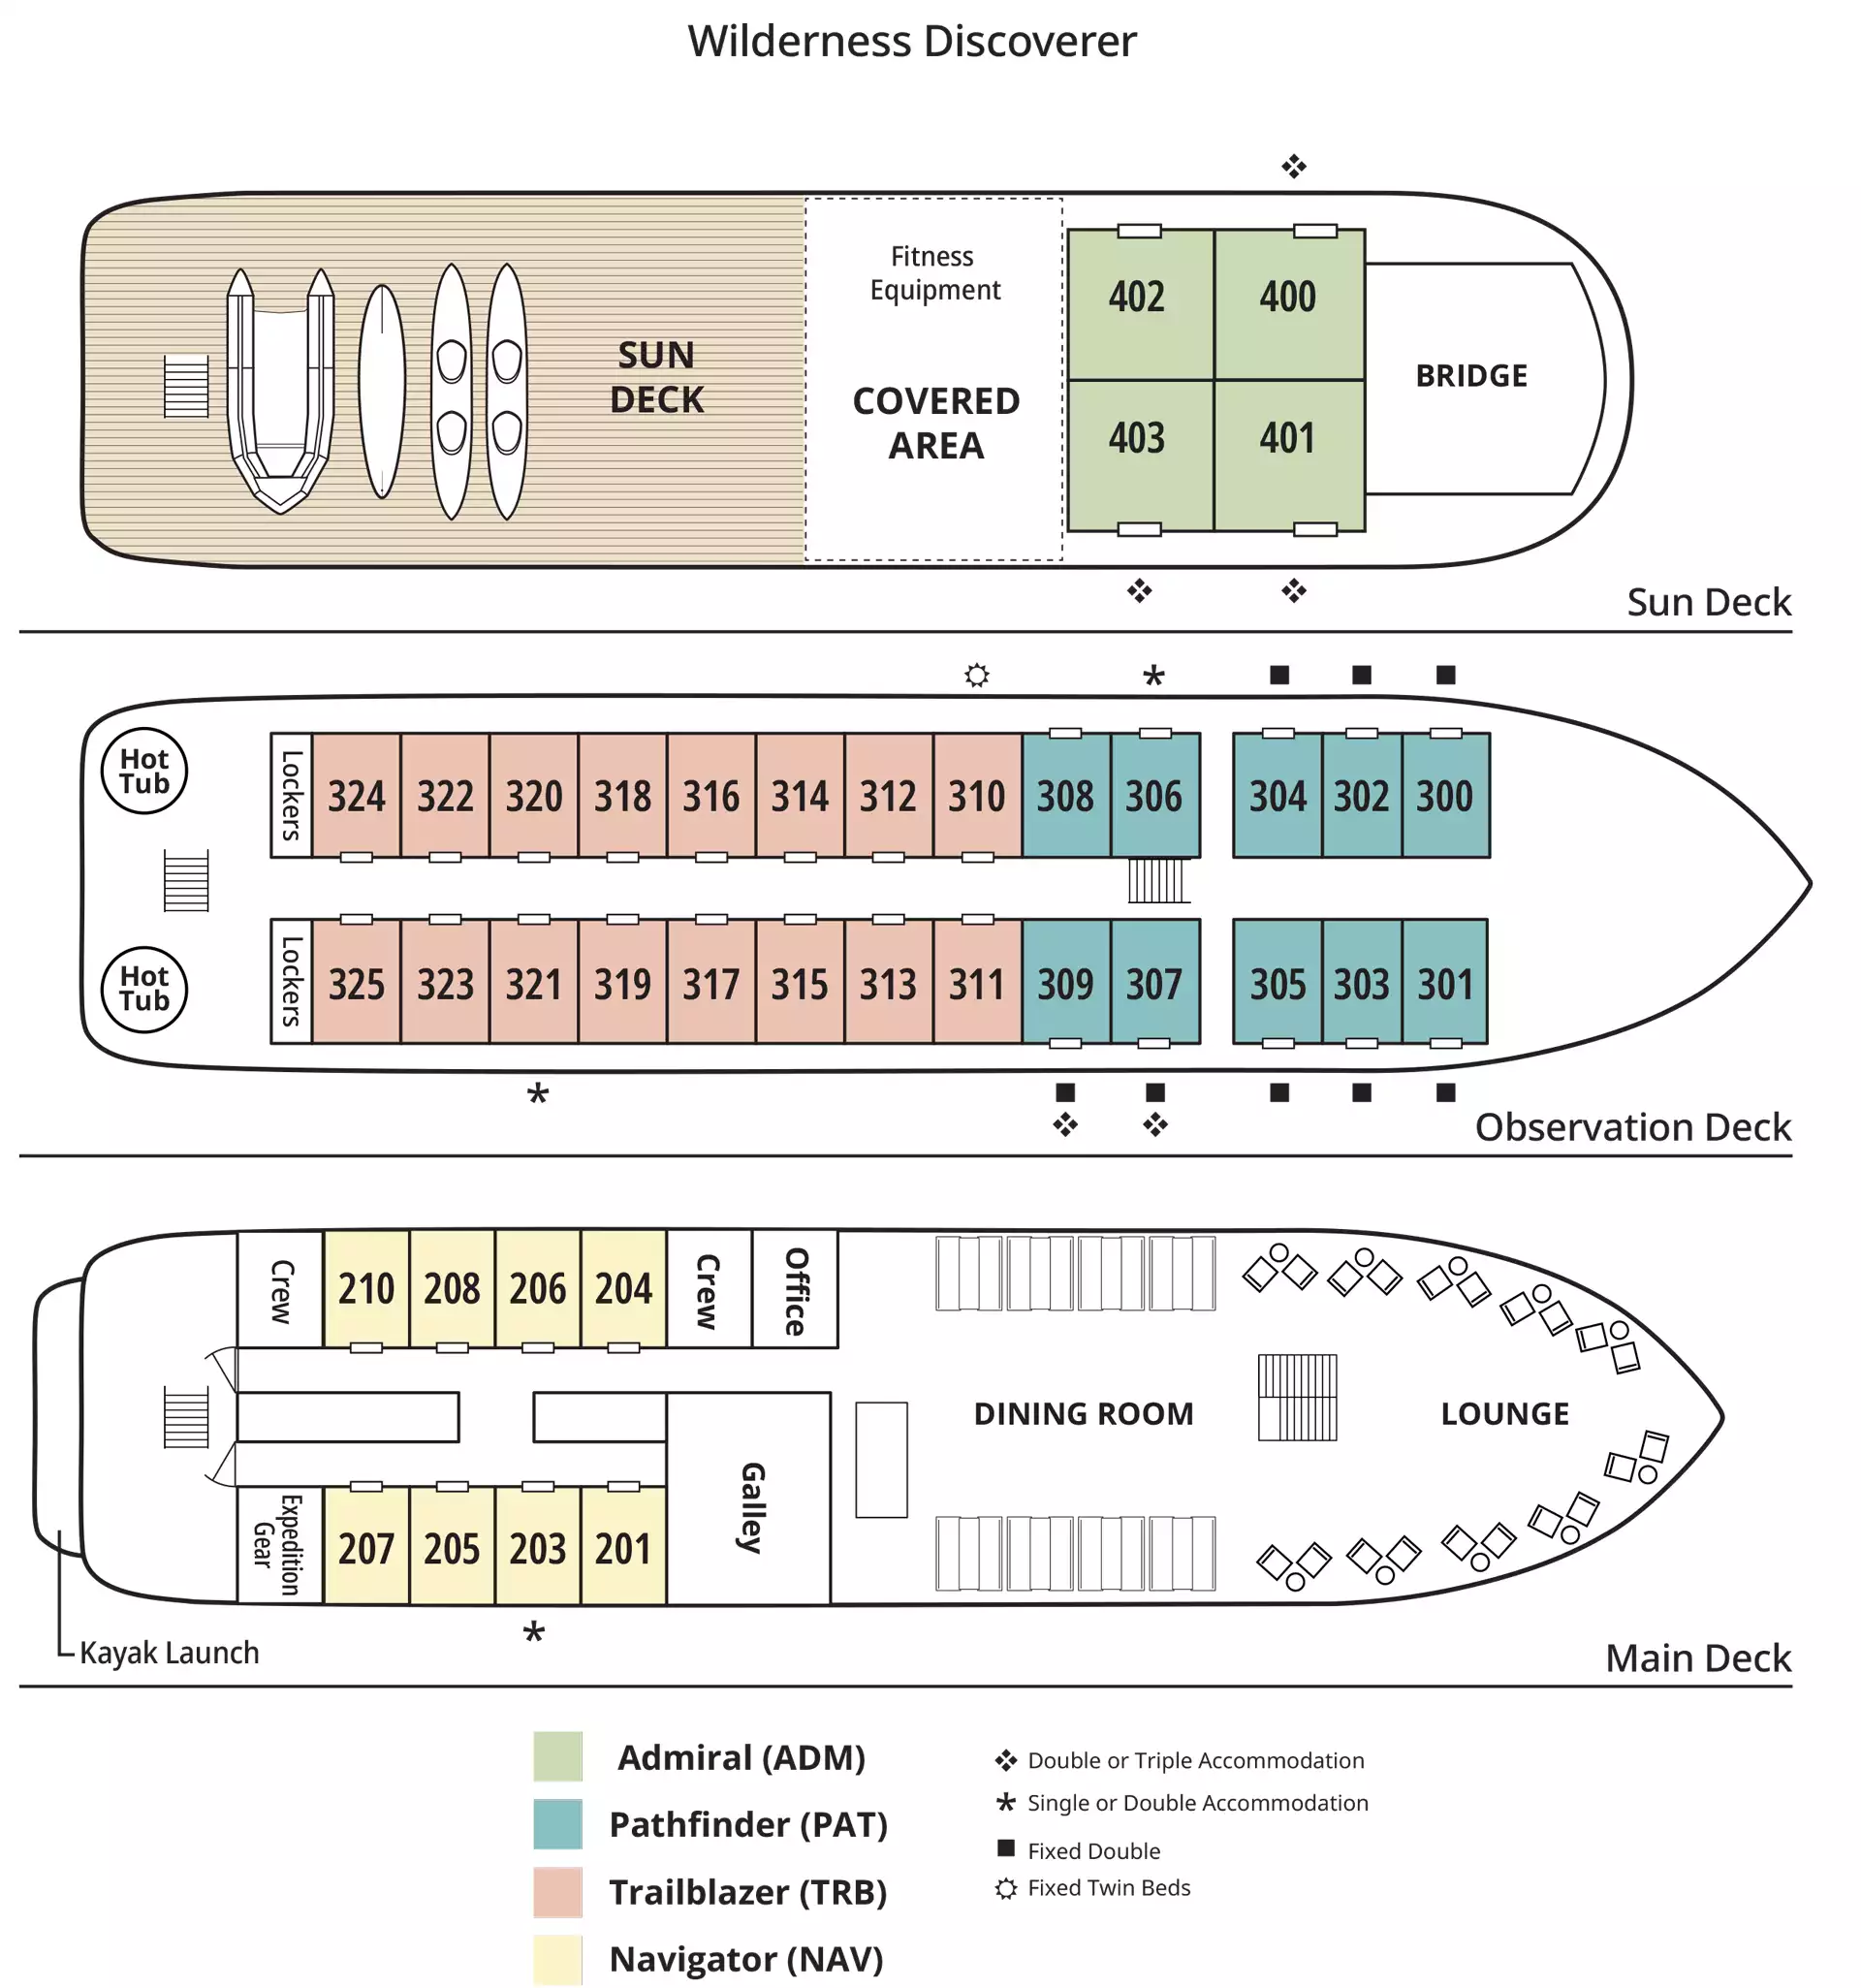 Deck plan of the Wilderness Discoverer showing 4 guest decks & 4 cabin categories by color plus bed configuration notes.